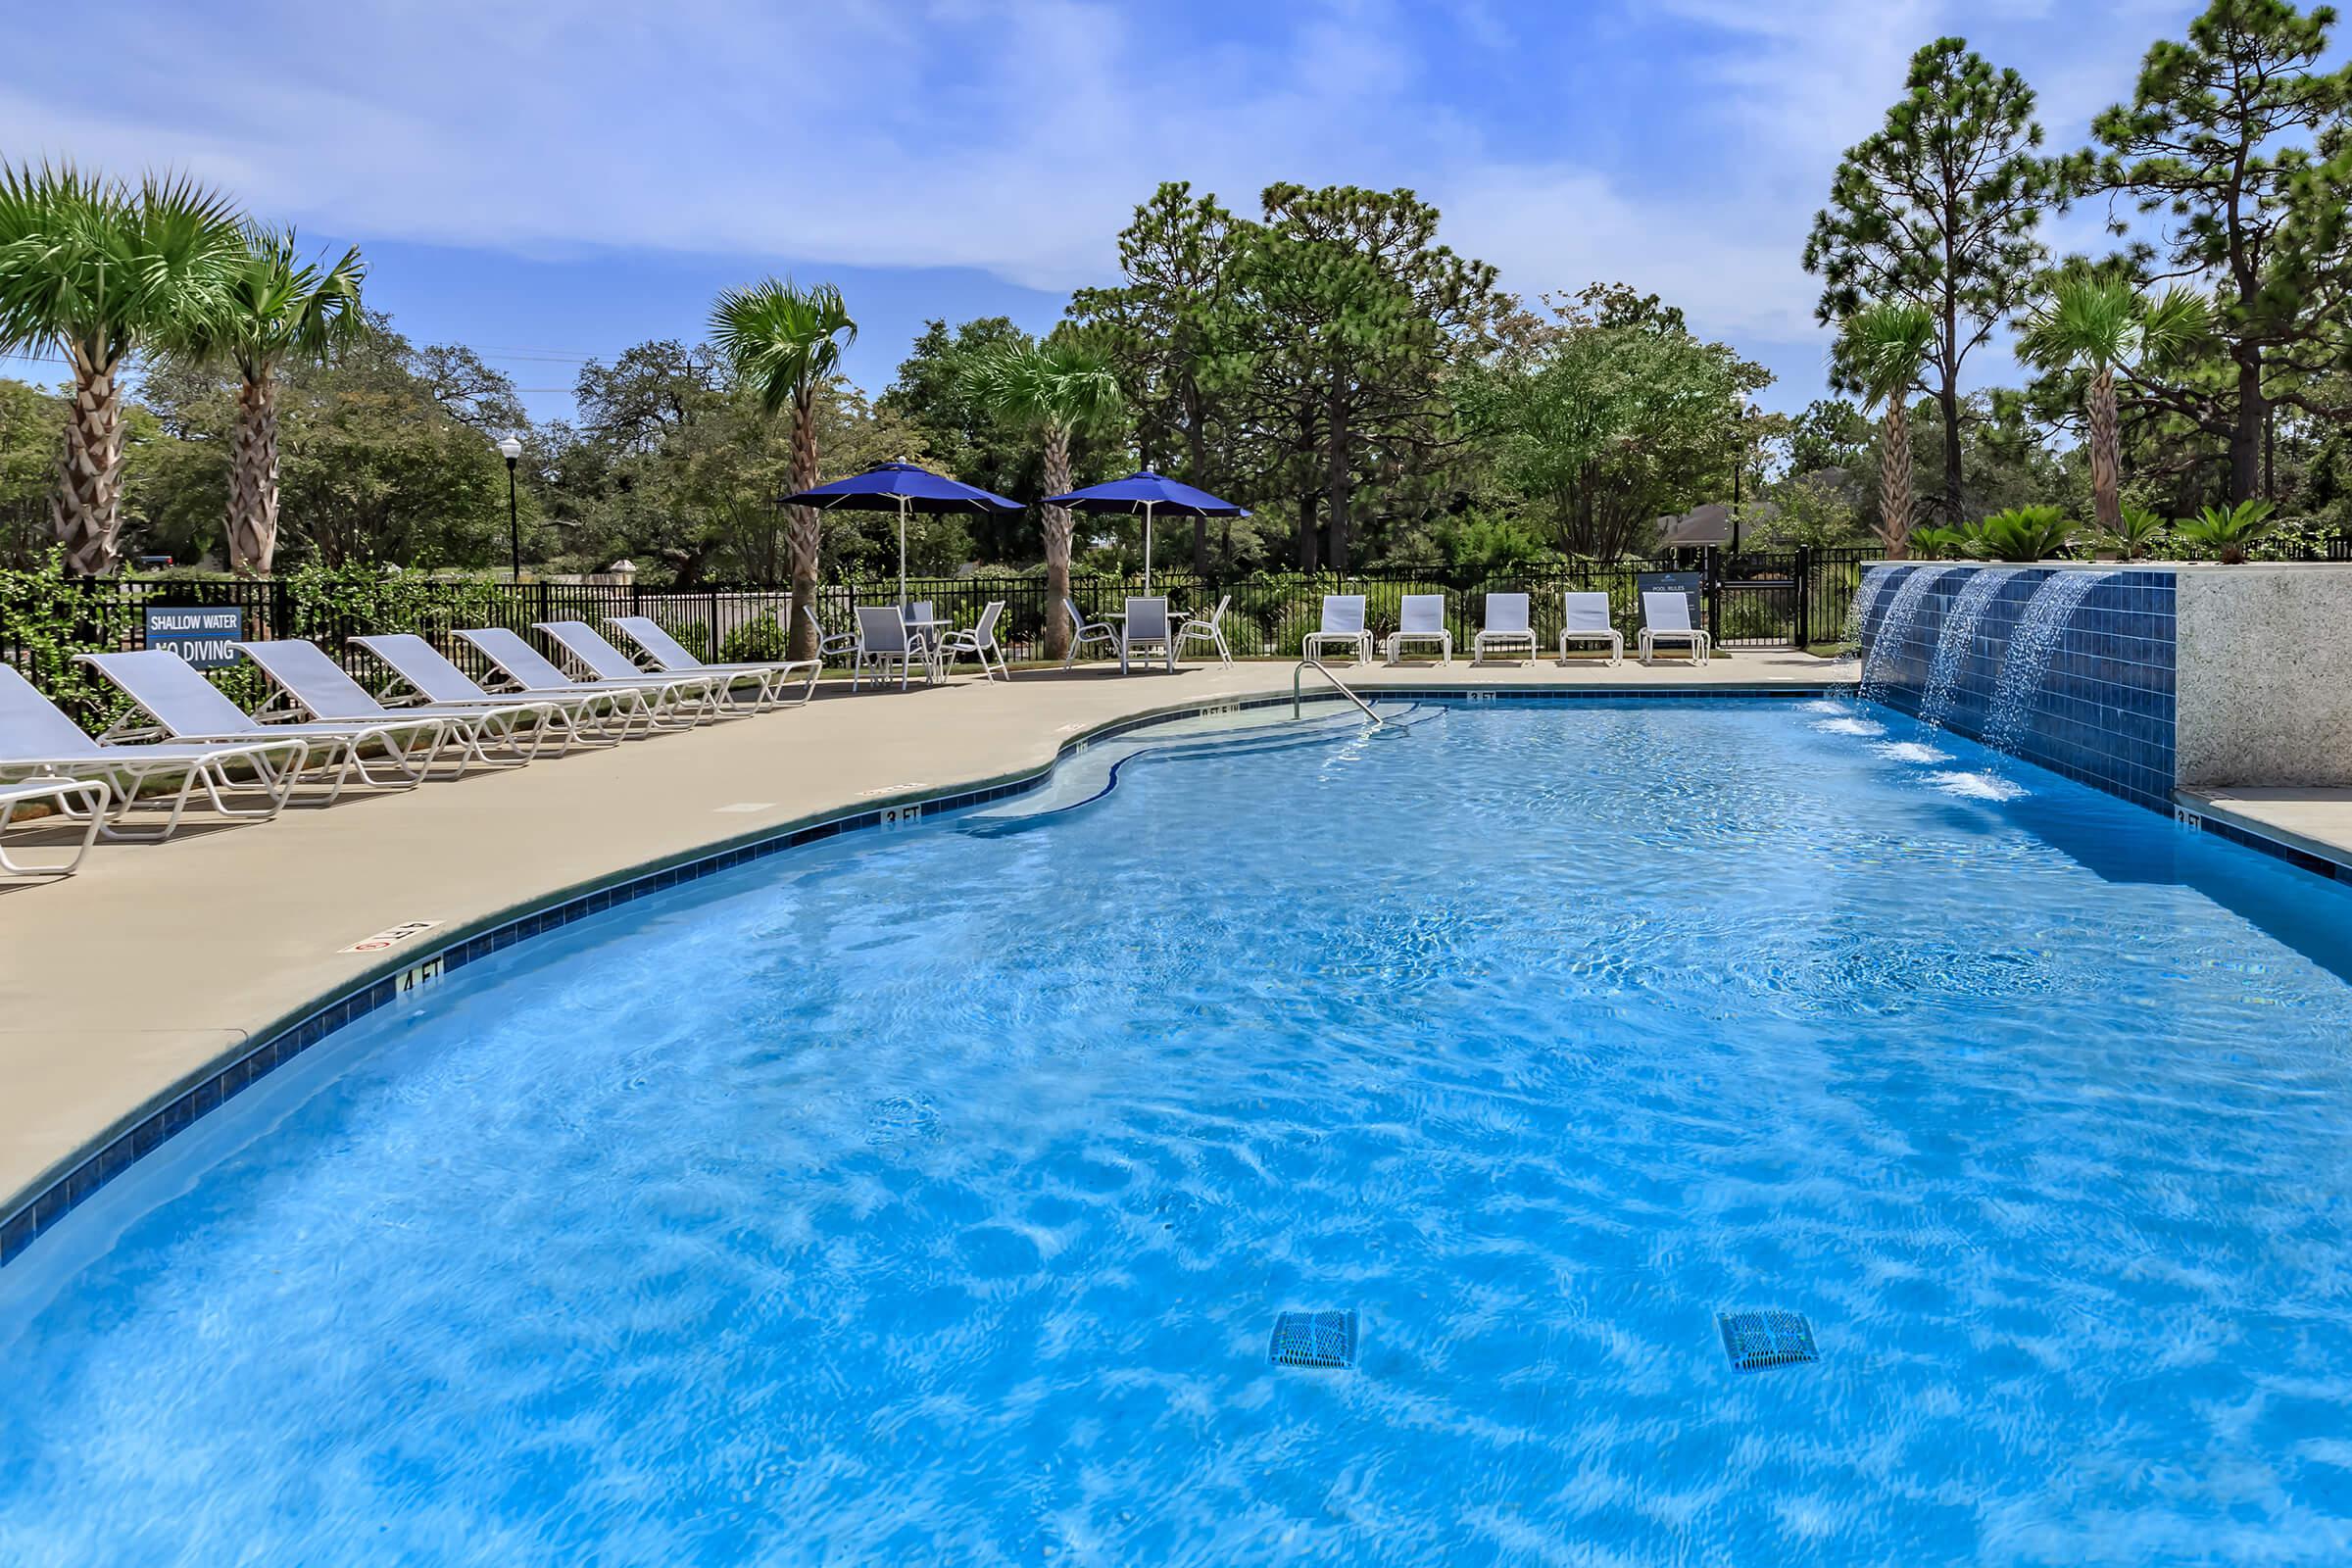 Shimmering swimming pool at The Townhomes at Beau Rivage in Wilmington, NC.